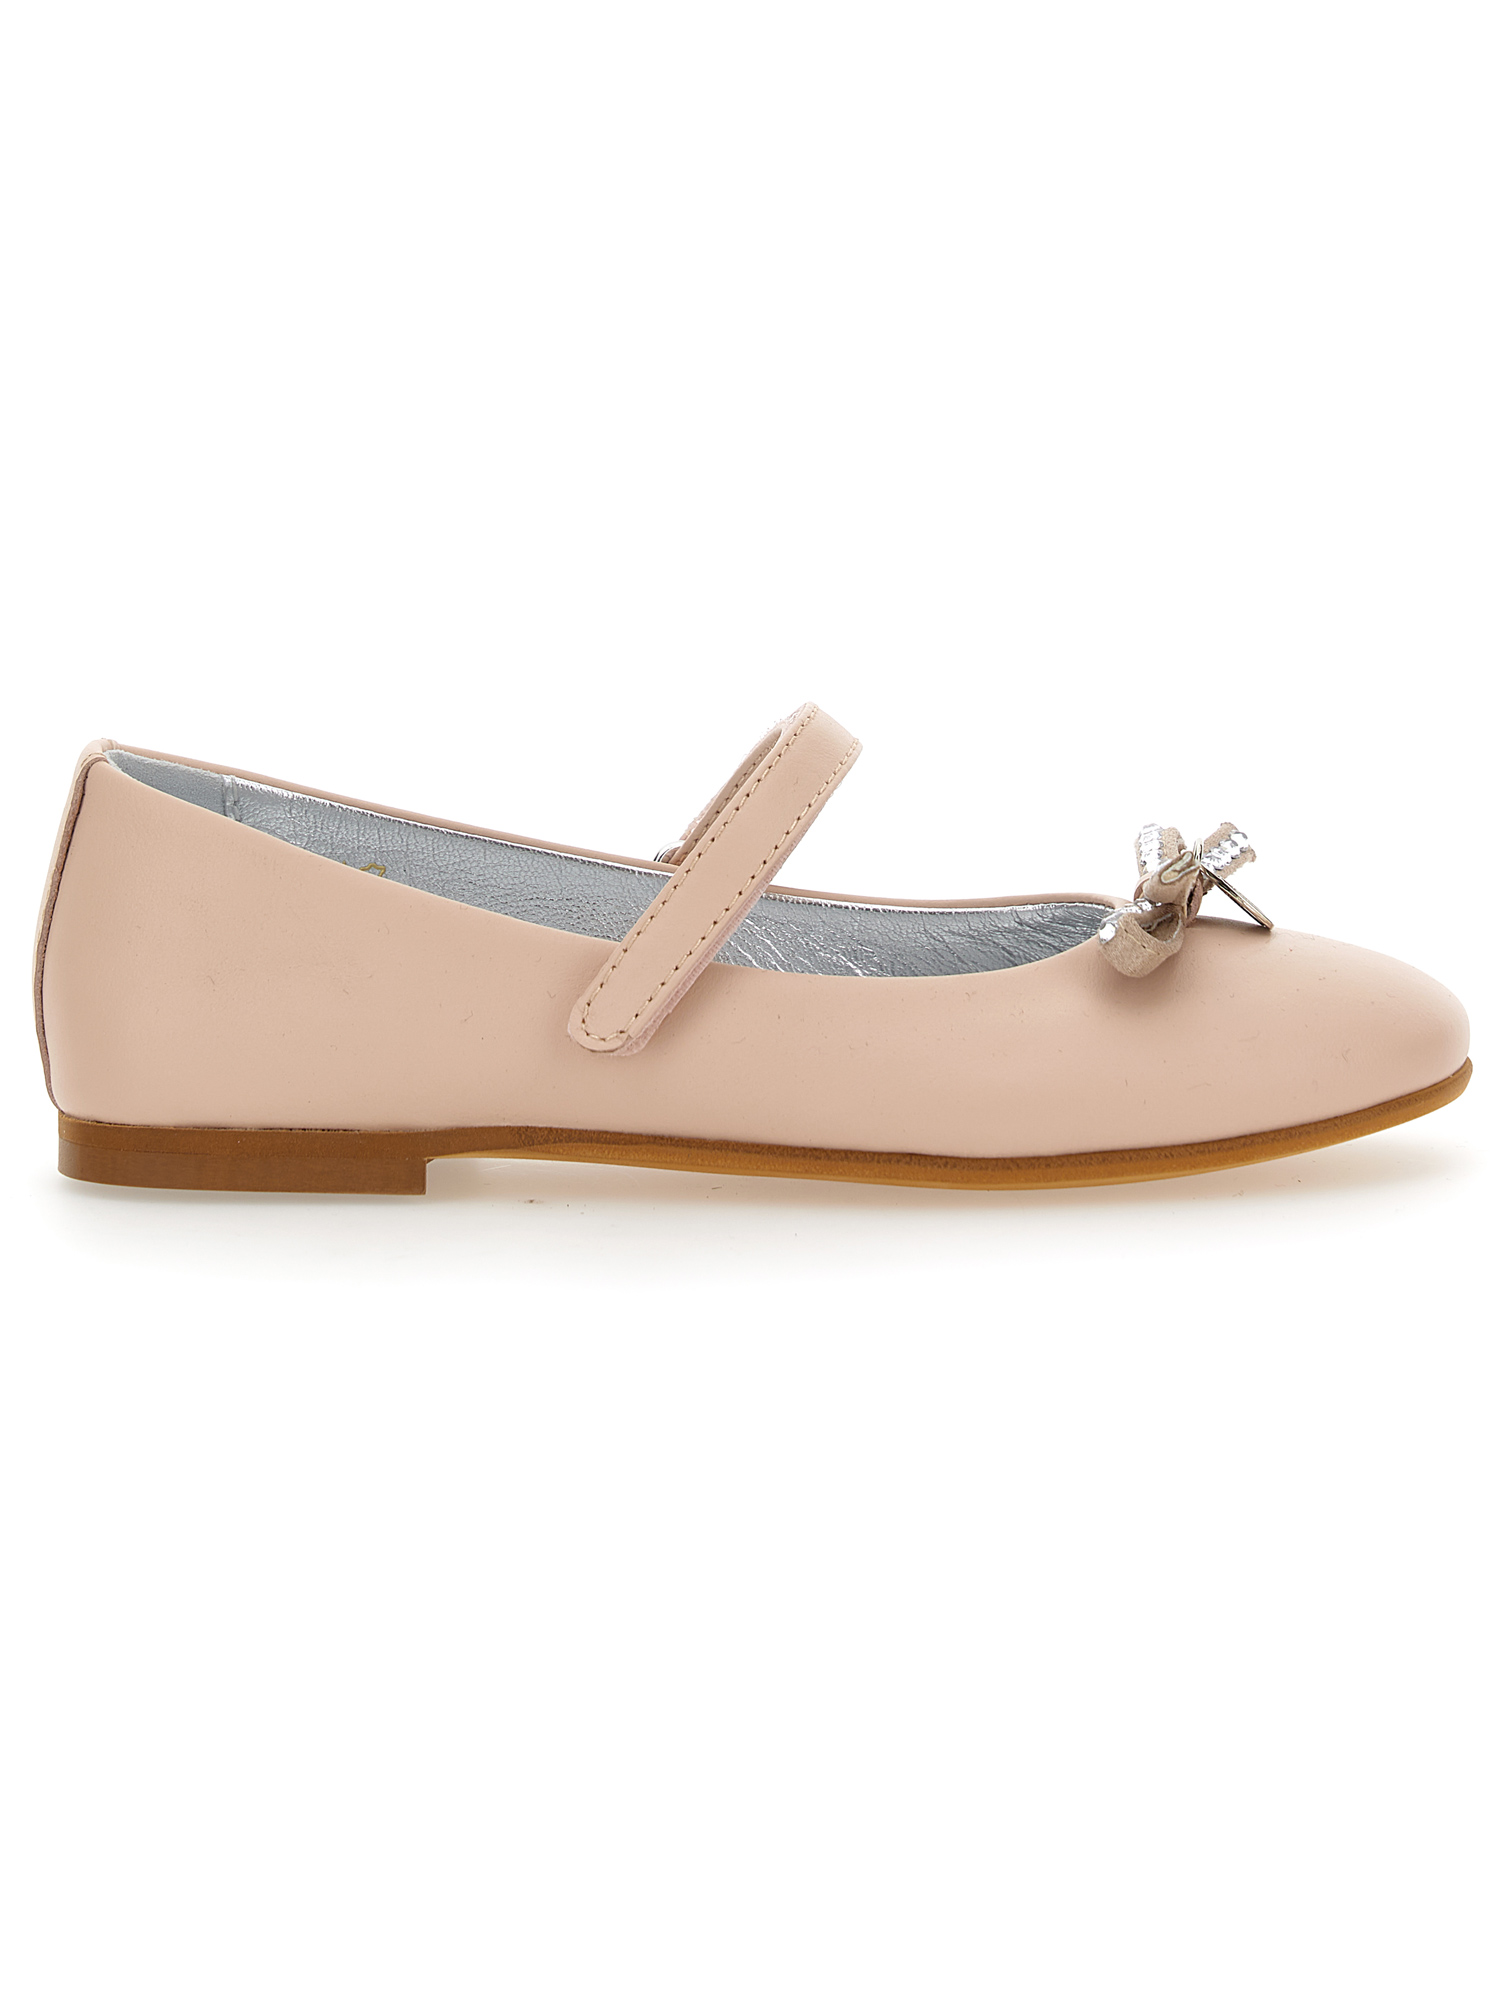 Monnalisa Leather Ballet Flats With Rhinestone Bow In Blush Pink